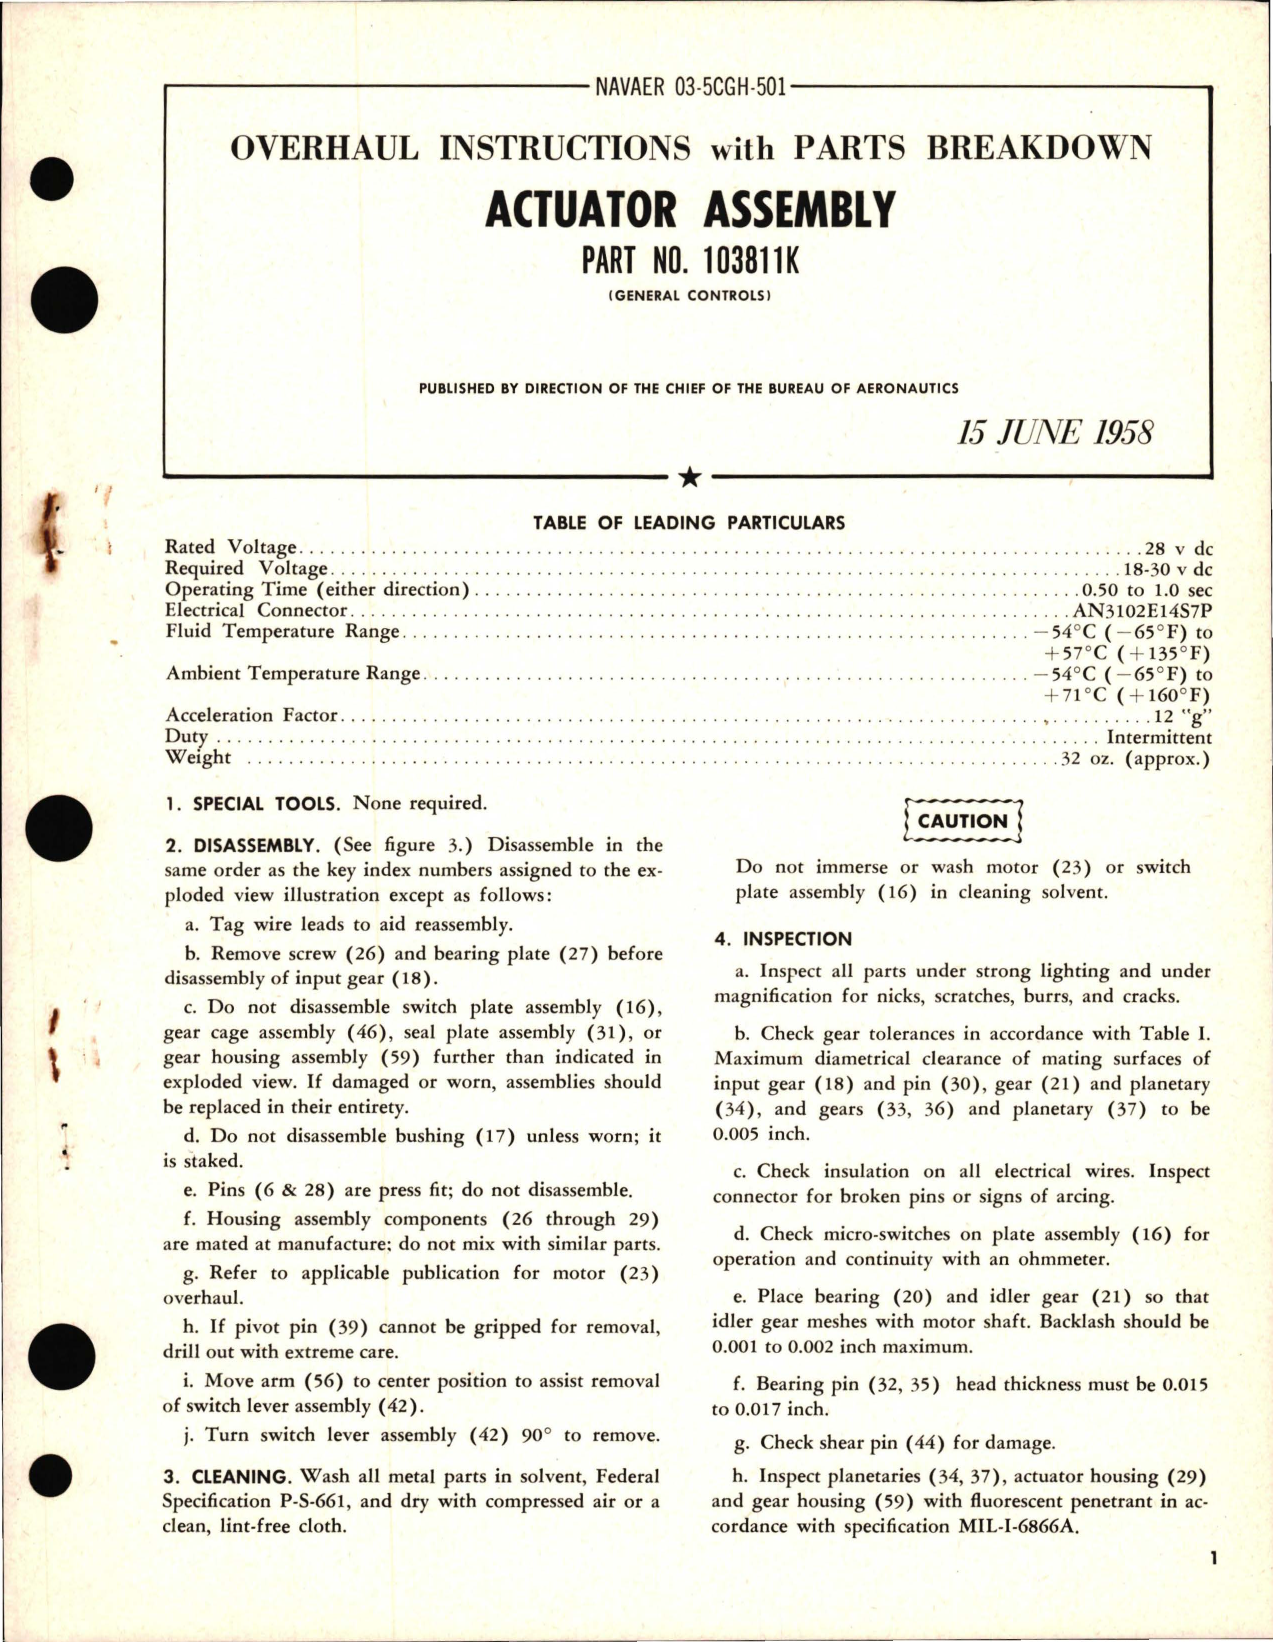 Sample page 1 from AirCorps Library document: Overhaul Instructions with Parts Breakdown for Actuator Assembly - Part 103811K 